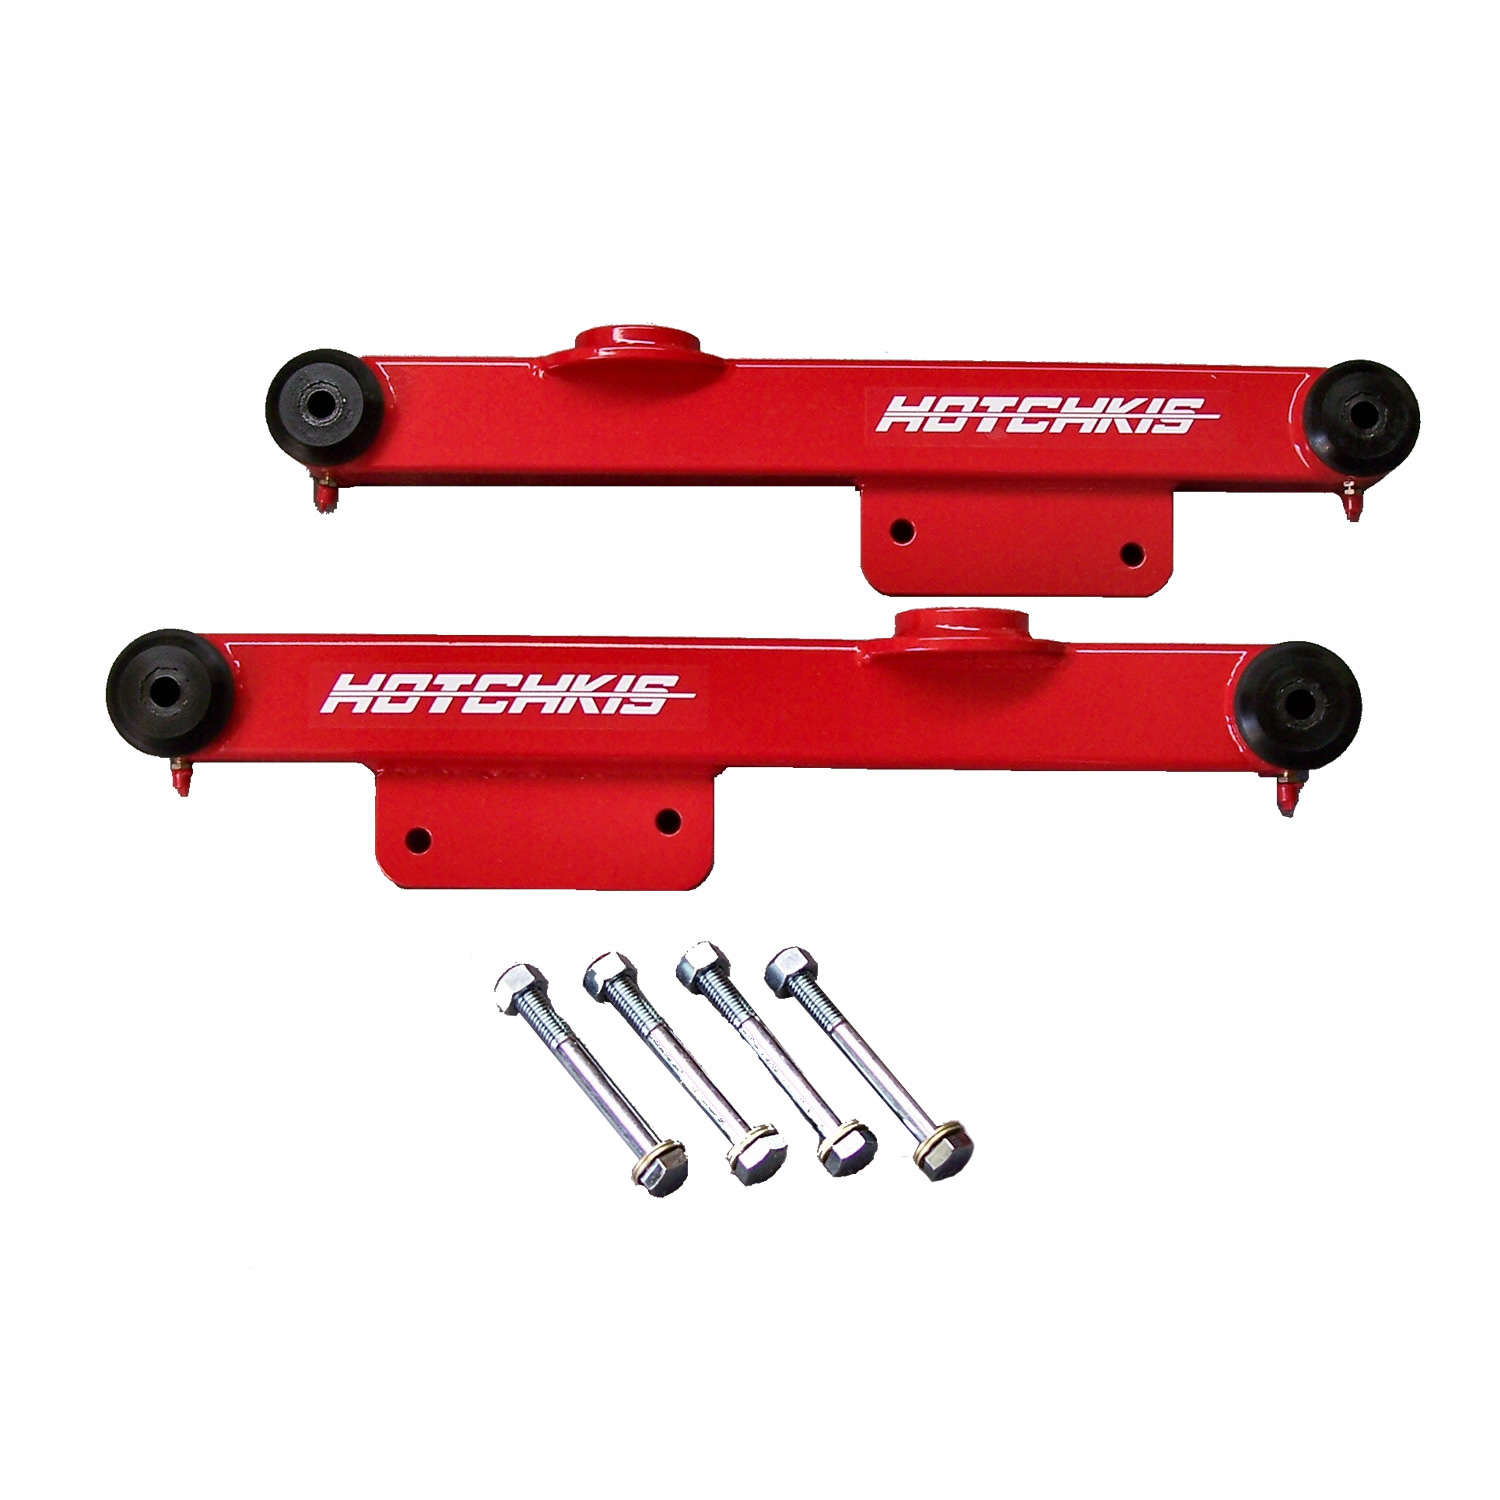 1999-2003 Ford Mustang Hotchkis Lower Trailing Arms - Red